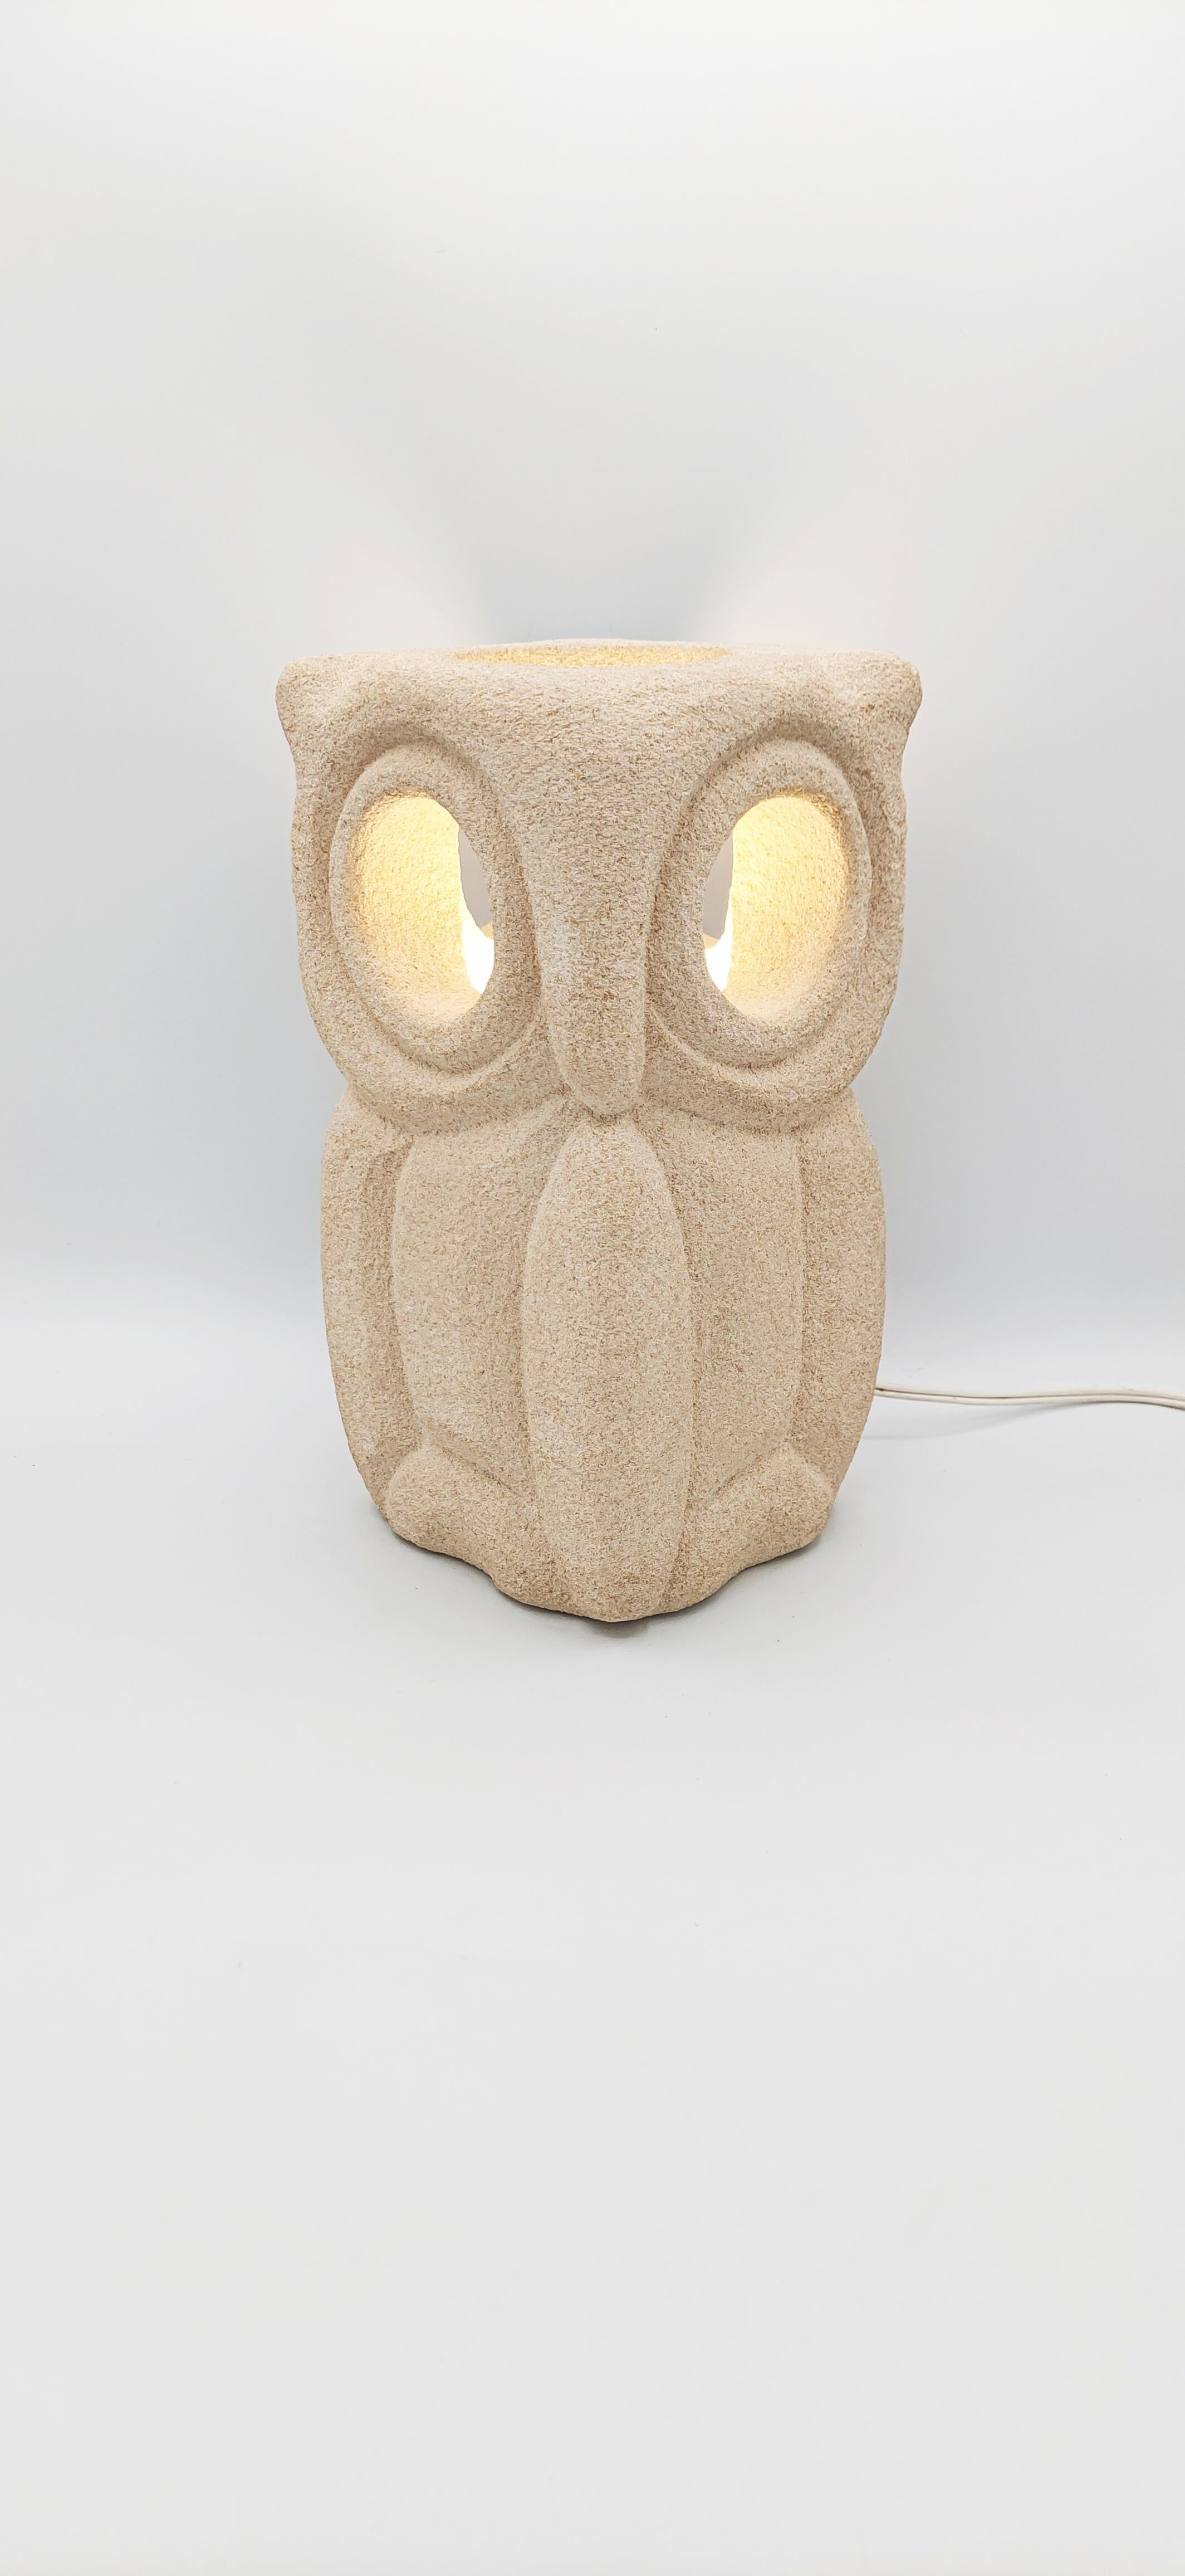 Albert Tormos owl table lamp manufactured in France in 1970s.
In perfect vintage condition. Very decorative table lamp , like a sculpture with light or without.